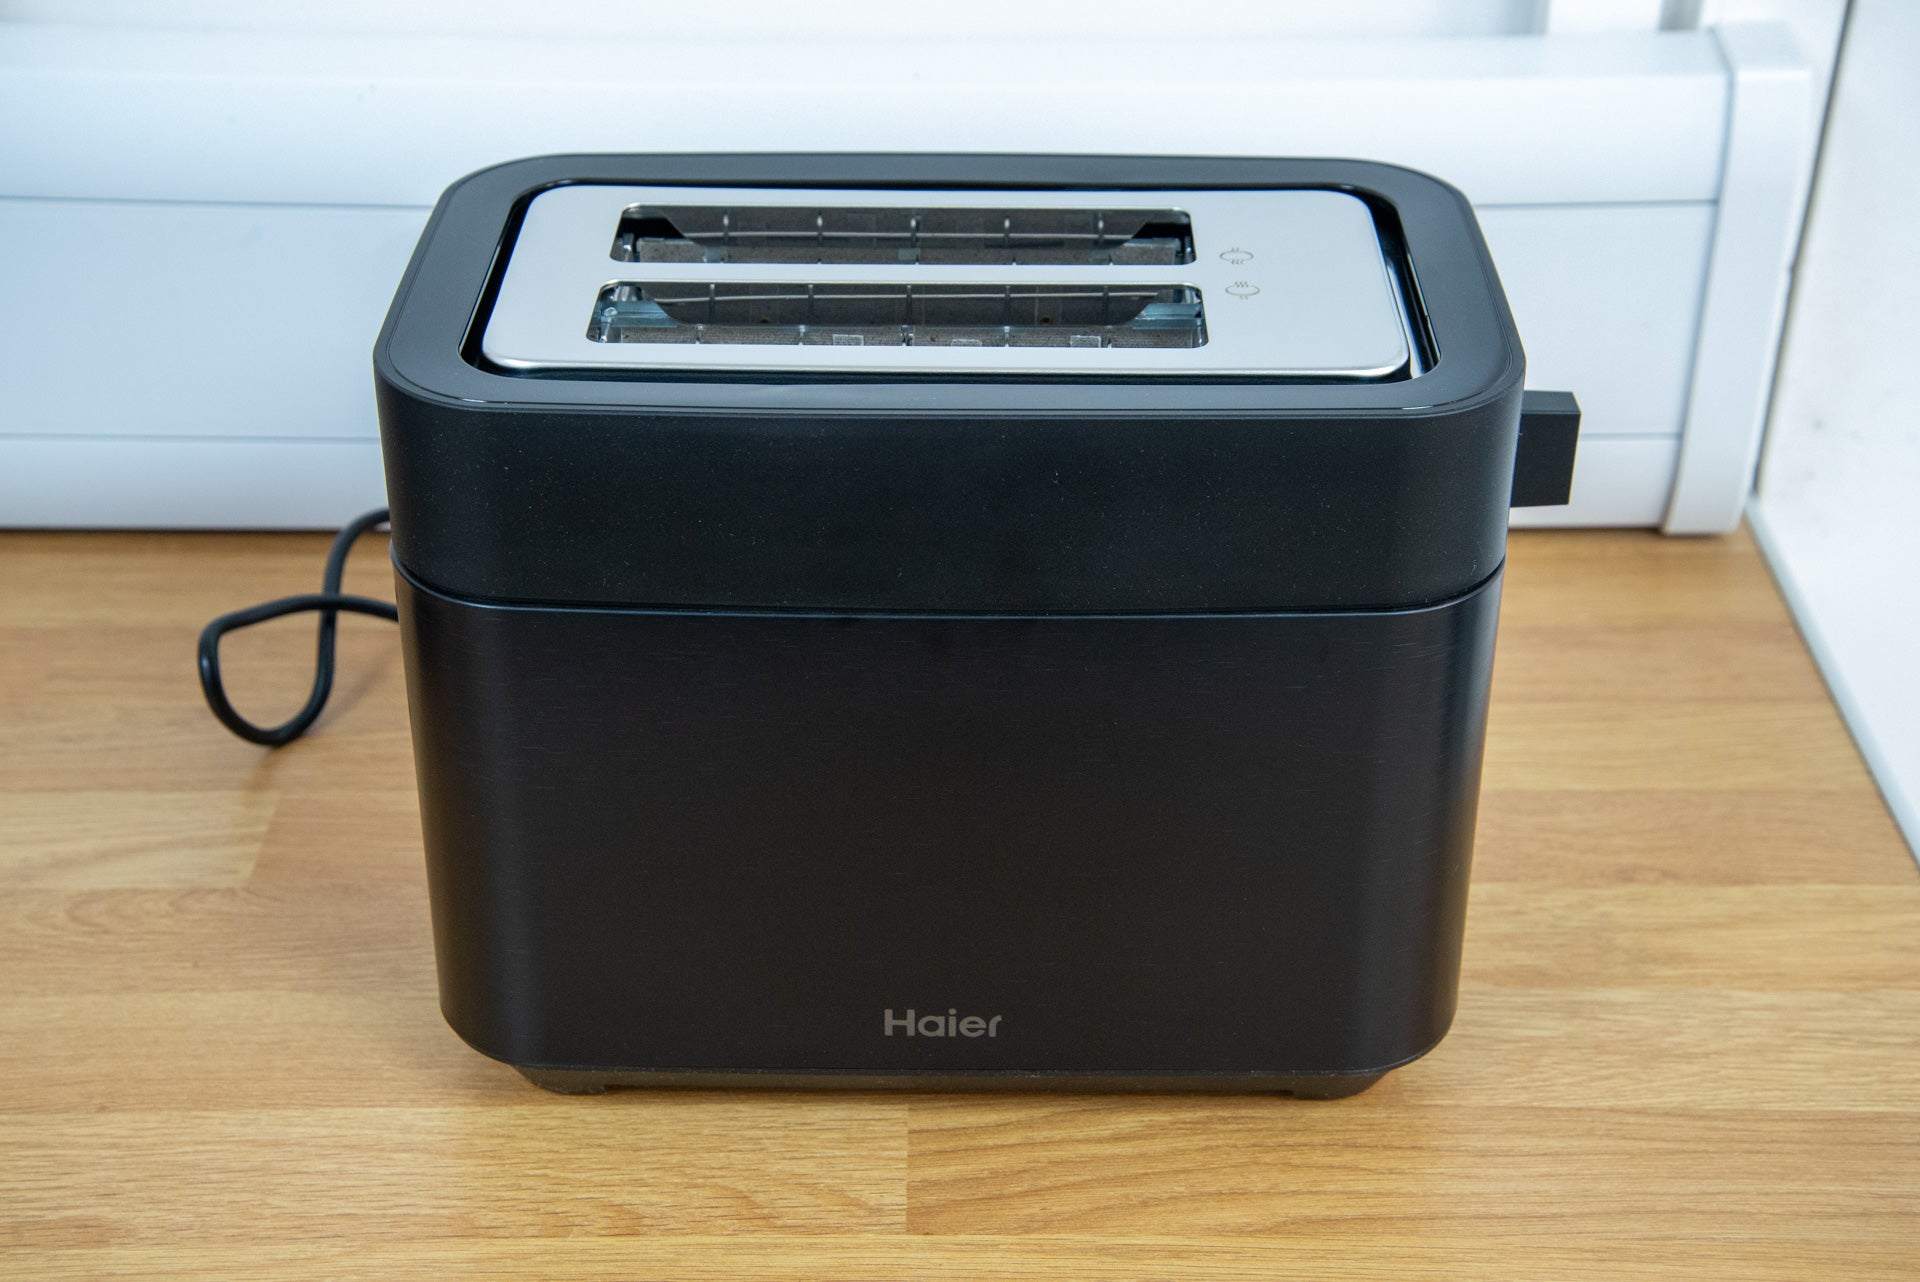 Haier I-Master Series 5 Toaster 2 Slice side view